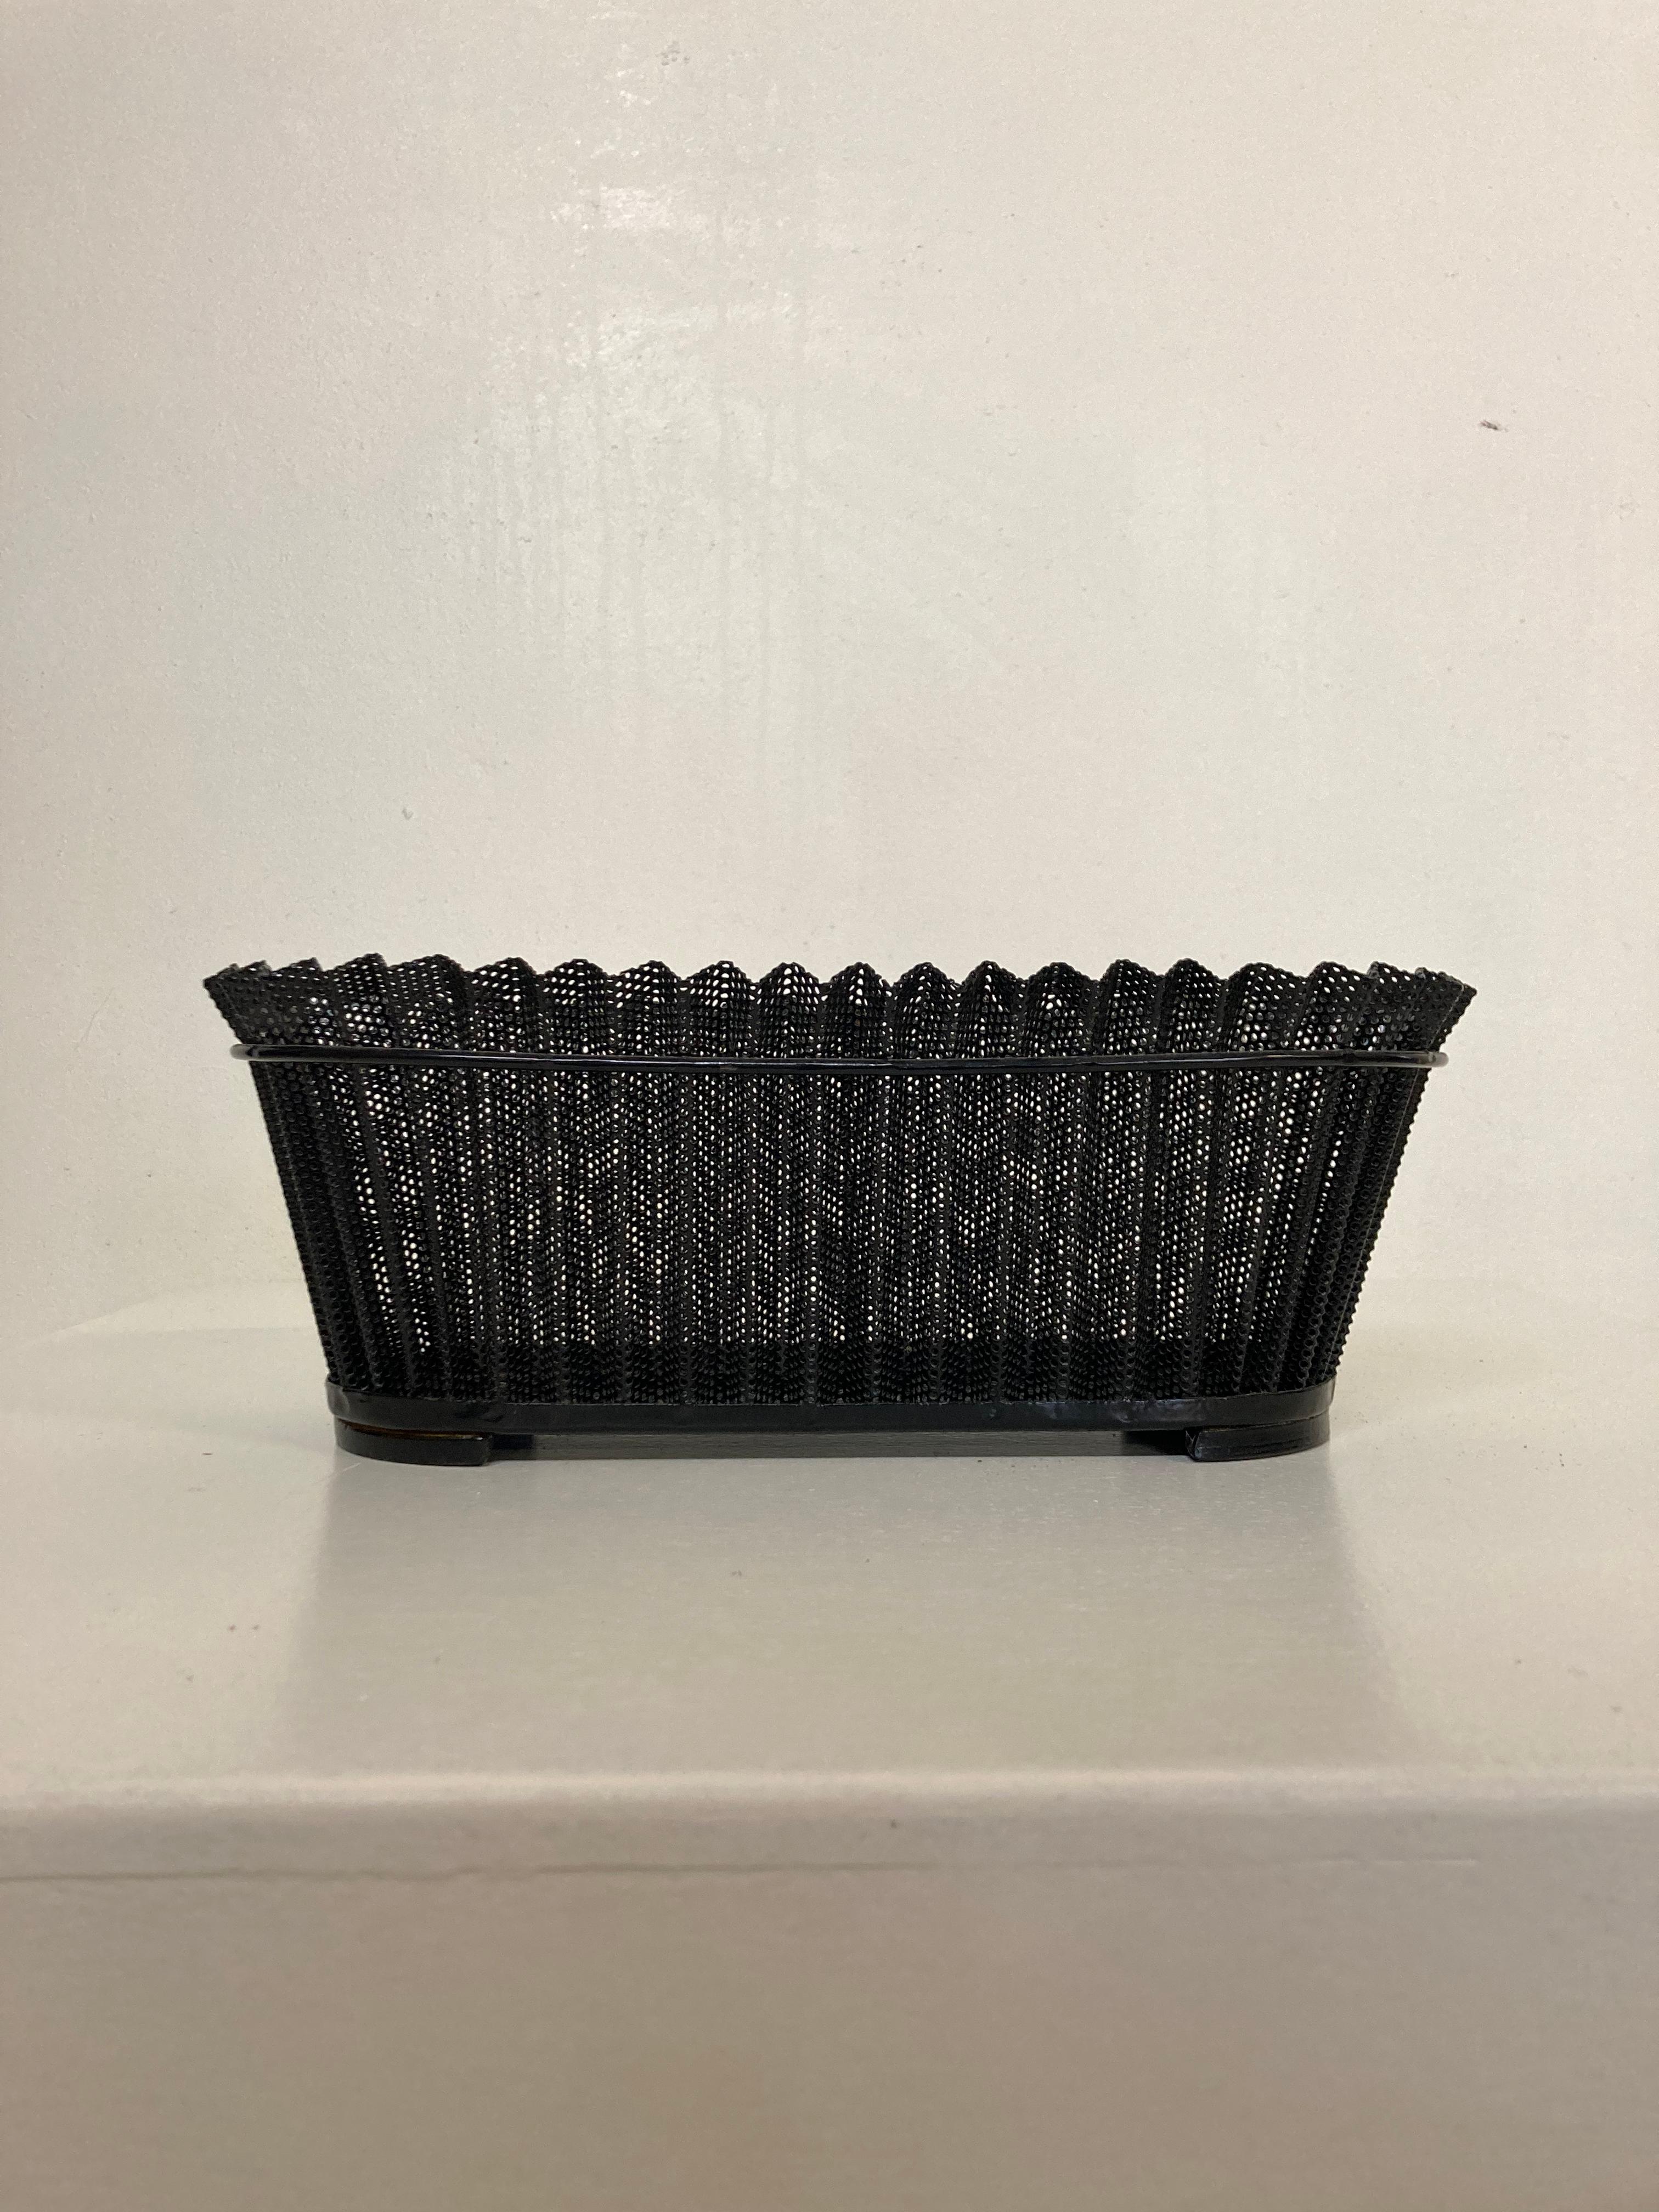 Midcentury modern planter by French designer Mathieu Matégot. 
Black lacquered perforated folded metal (Rigitulle). 

Literature: 